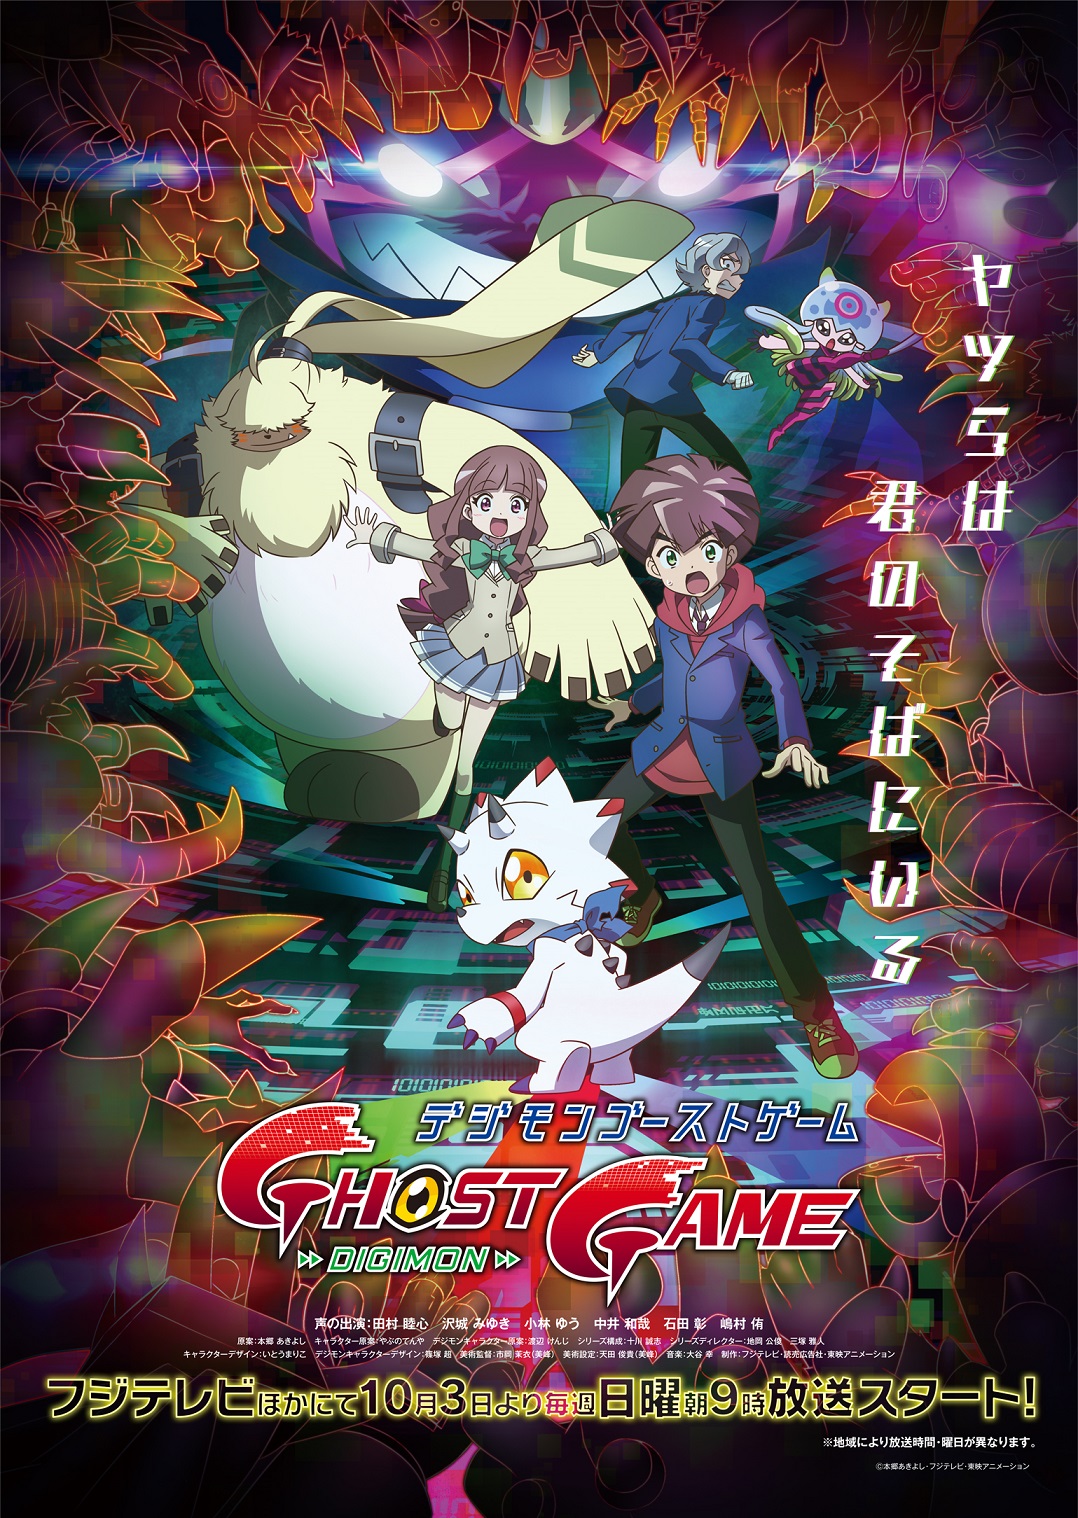 DIGIMON GHOST GAME - FUJI TELEVISION NETWORK, INC.